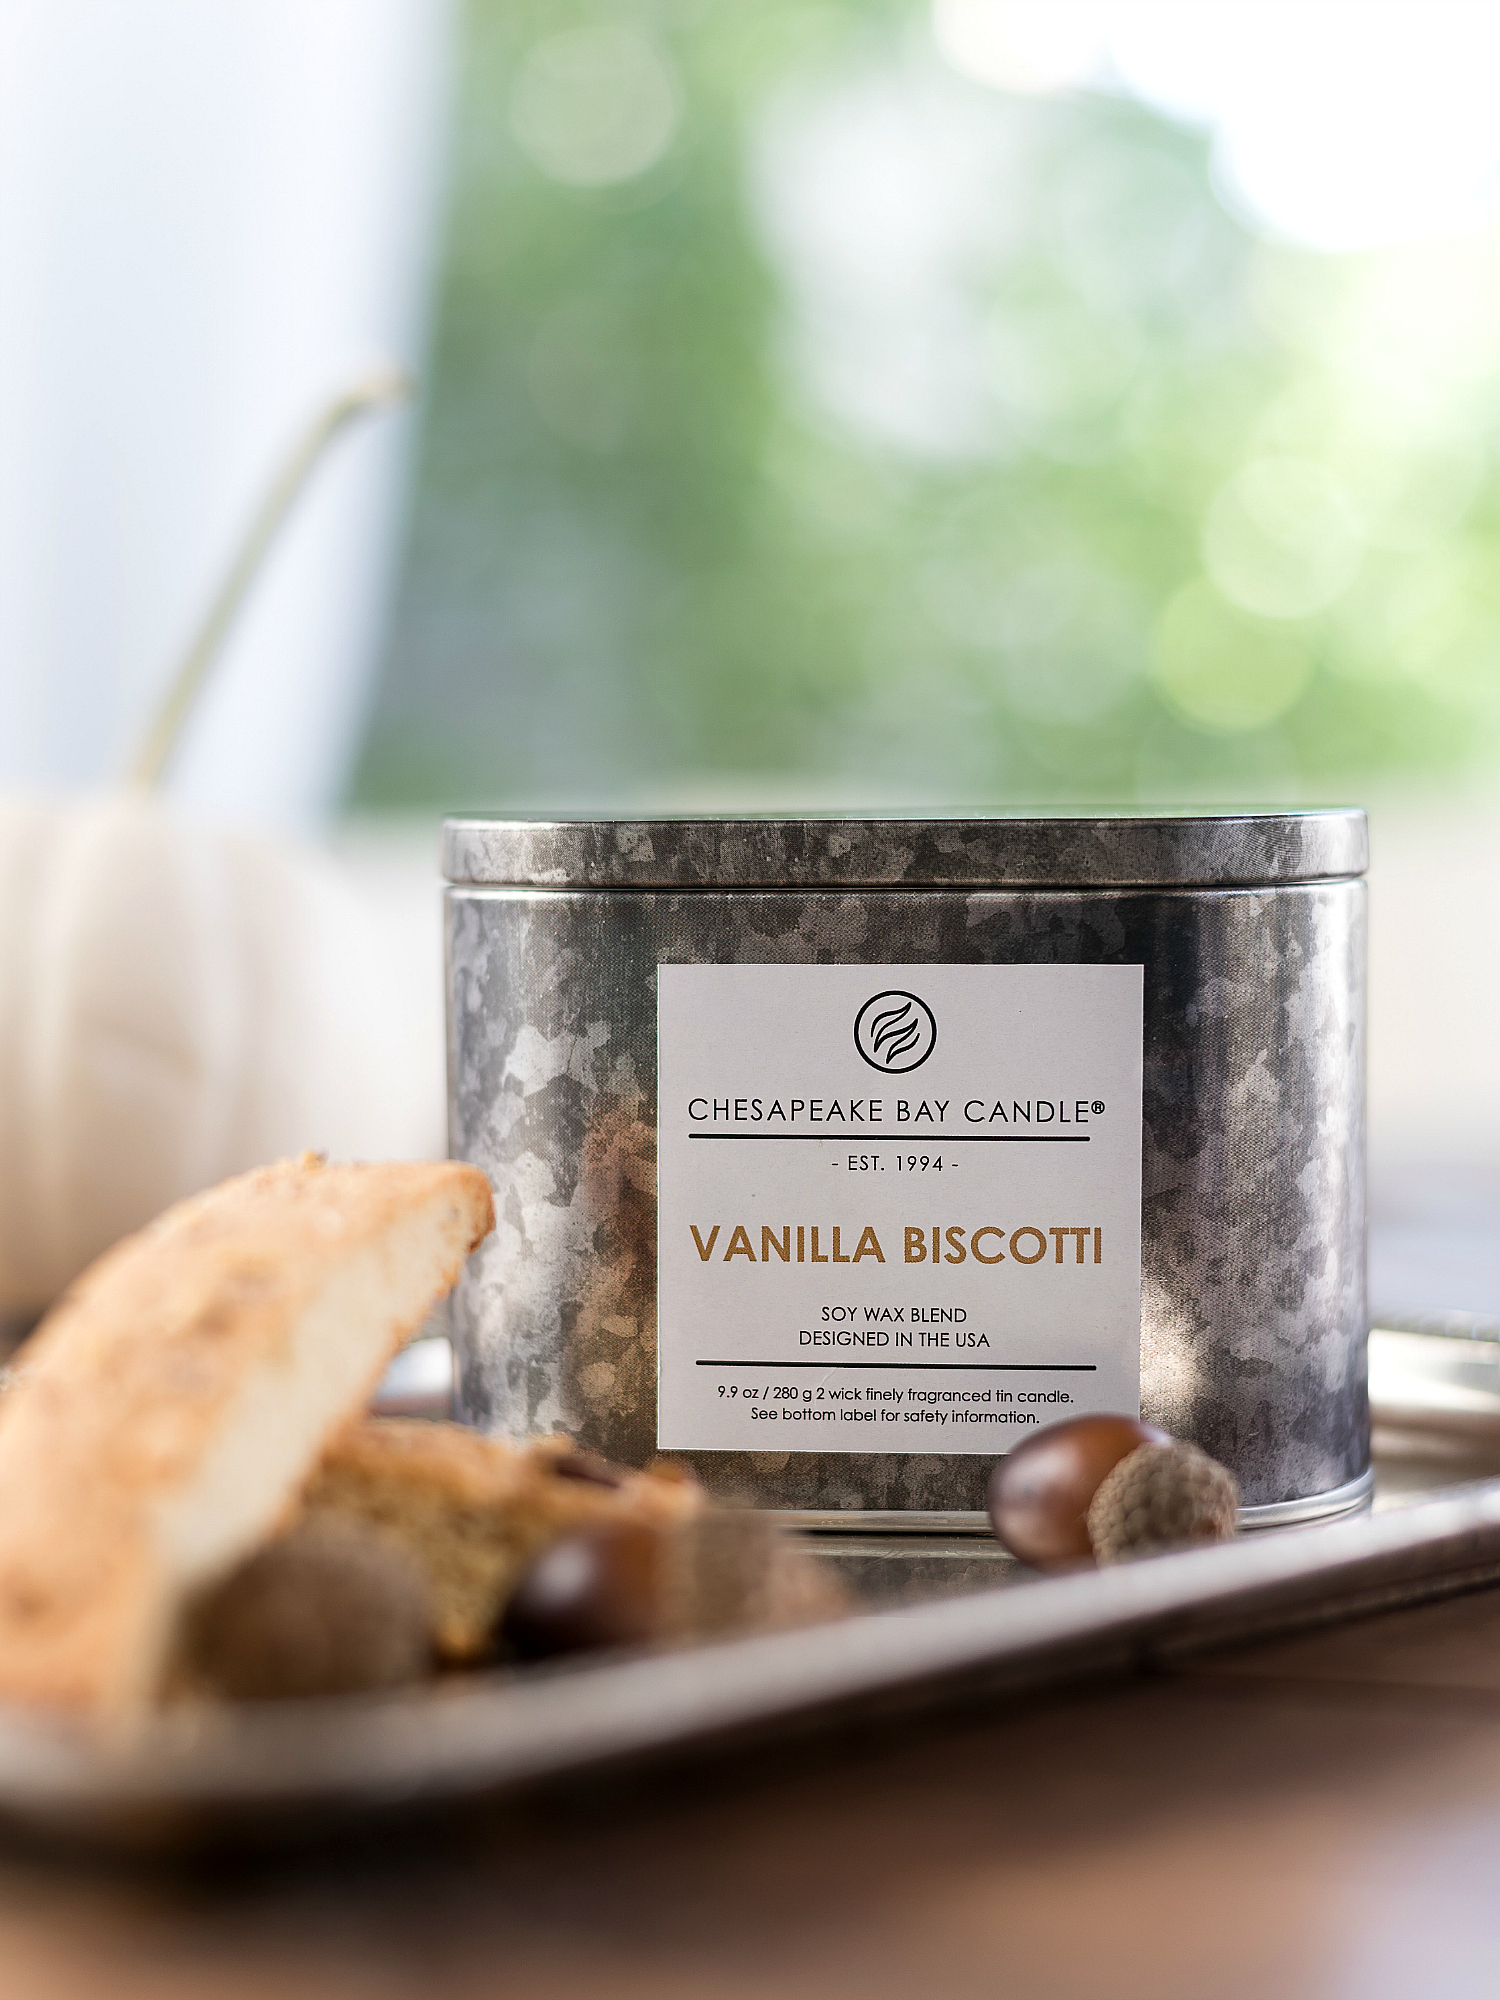 Vanilla Biscotti from Chesapeake Bay Candle Heritage Collection Fall 2017